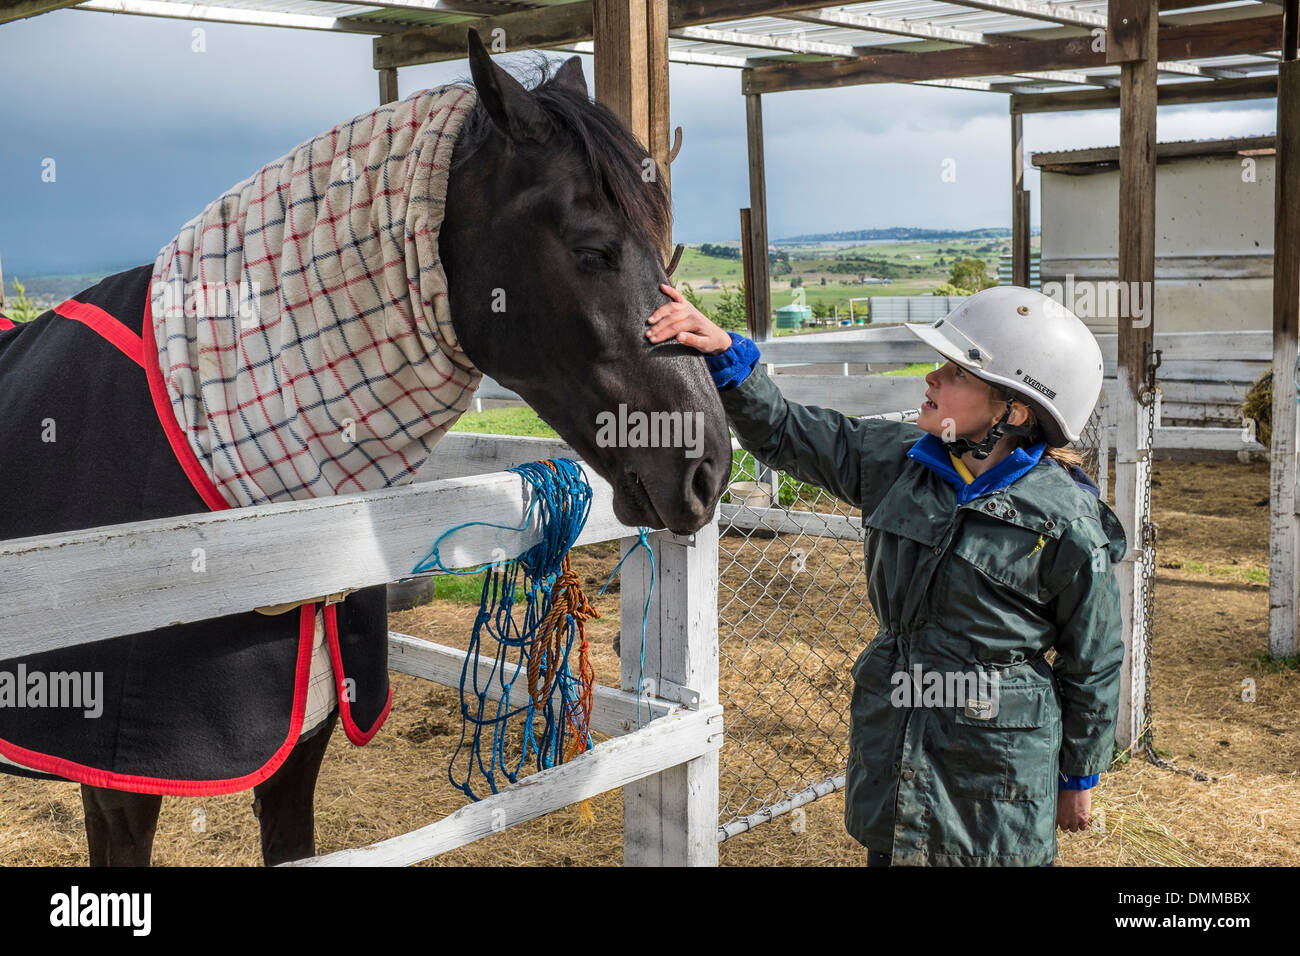 A young girl getting to know a horse at a riding school in Tasmania Australia Stock Photo